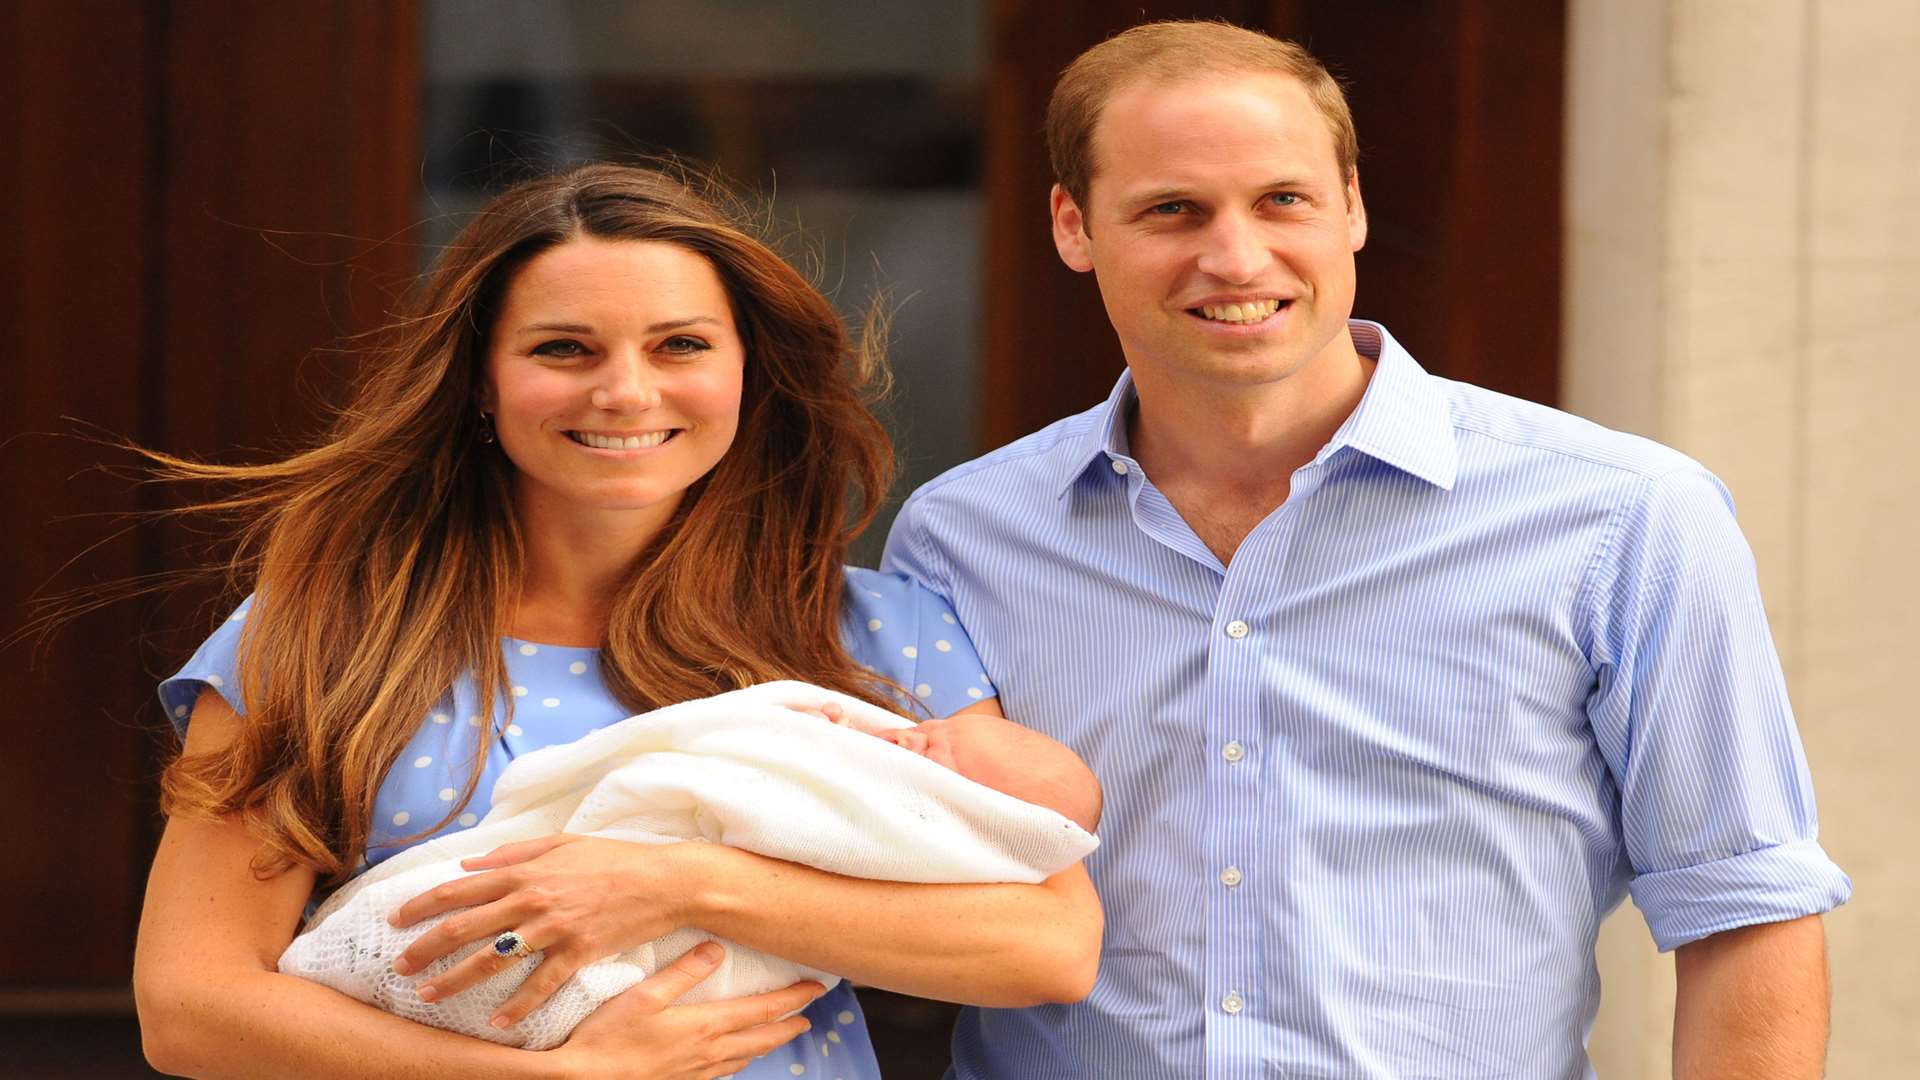 The Duke and Duchess of Cambridge outside St Mary's Hospital, London with their first baby, Prince George